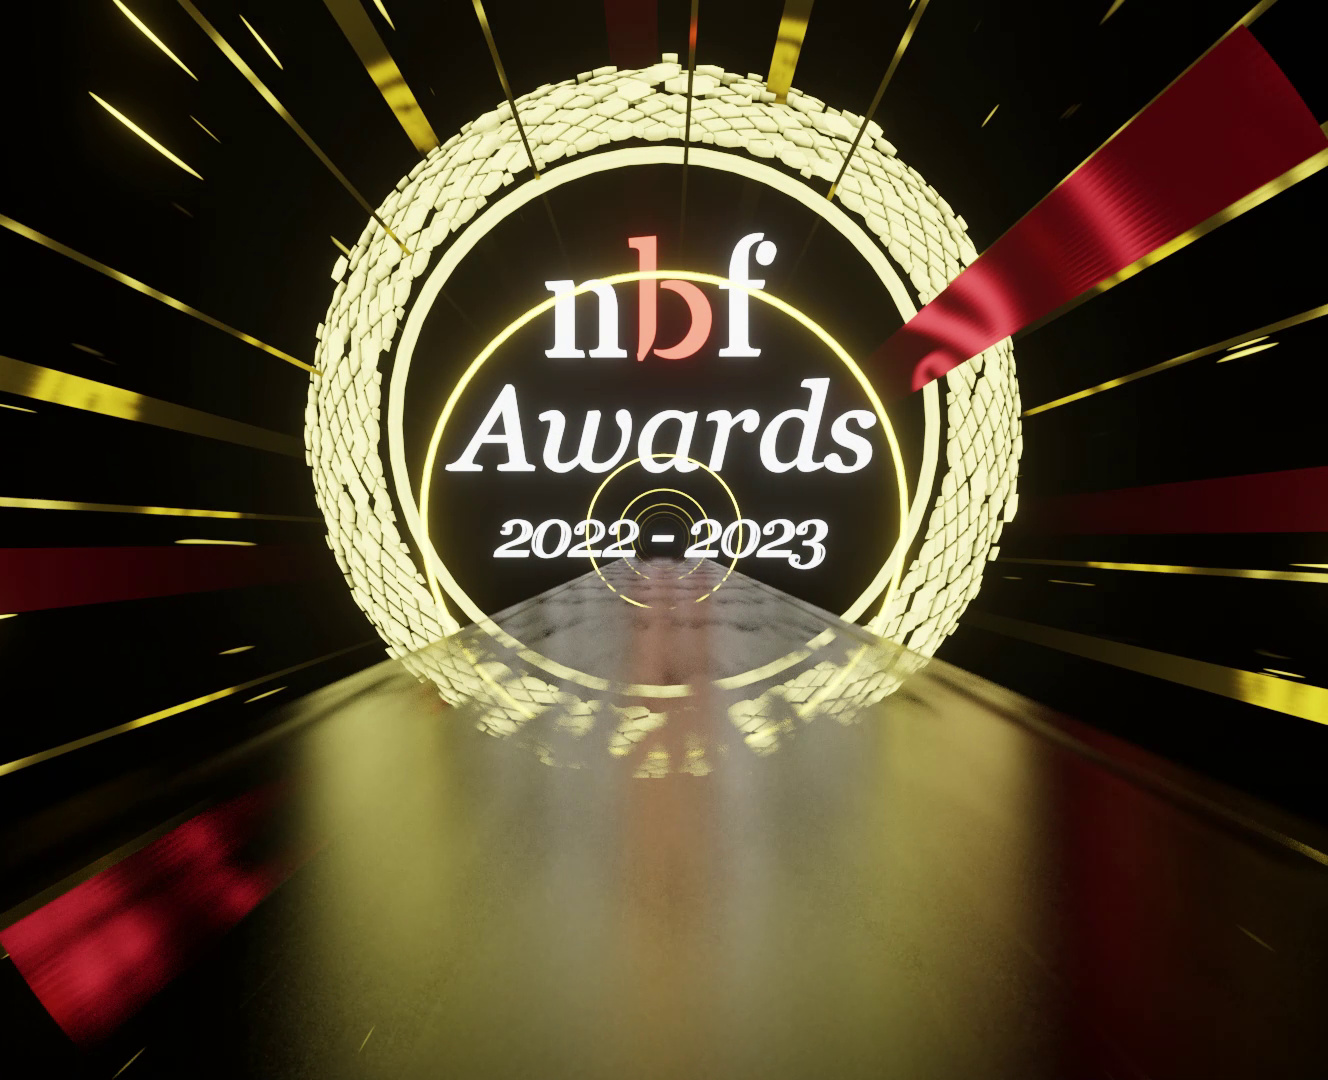 graphical image displaying the text: "NBF Awards 2022-2023" from the live intro animation for the awards event